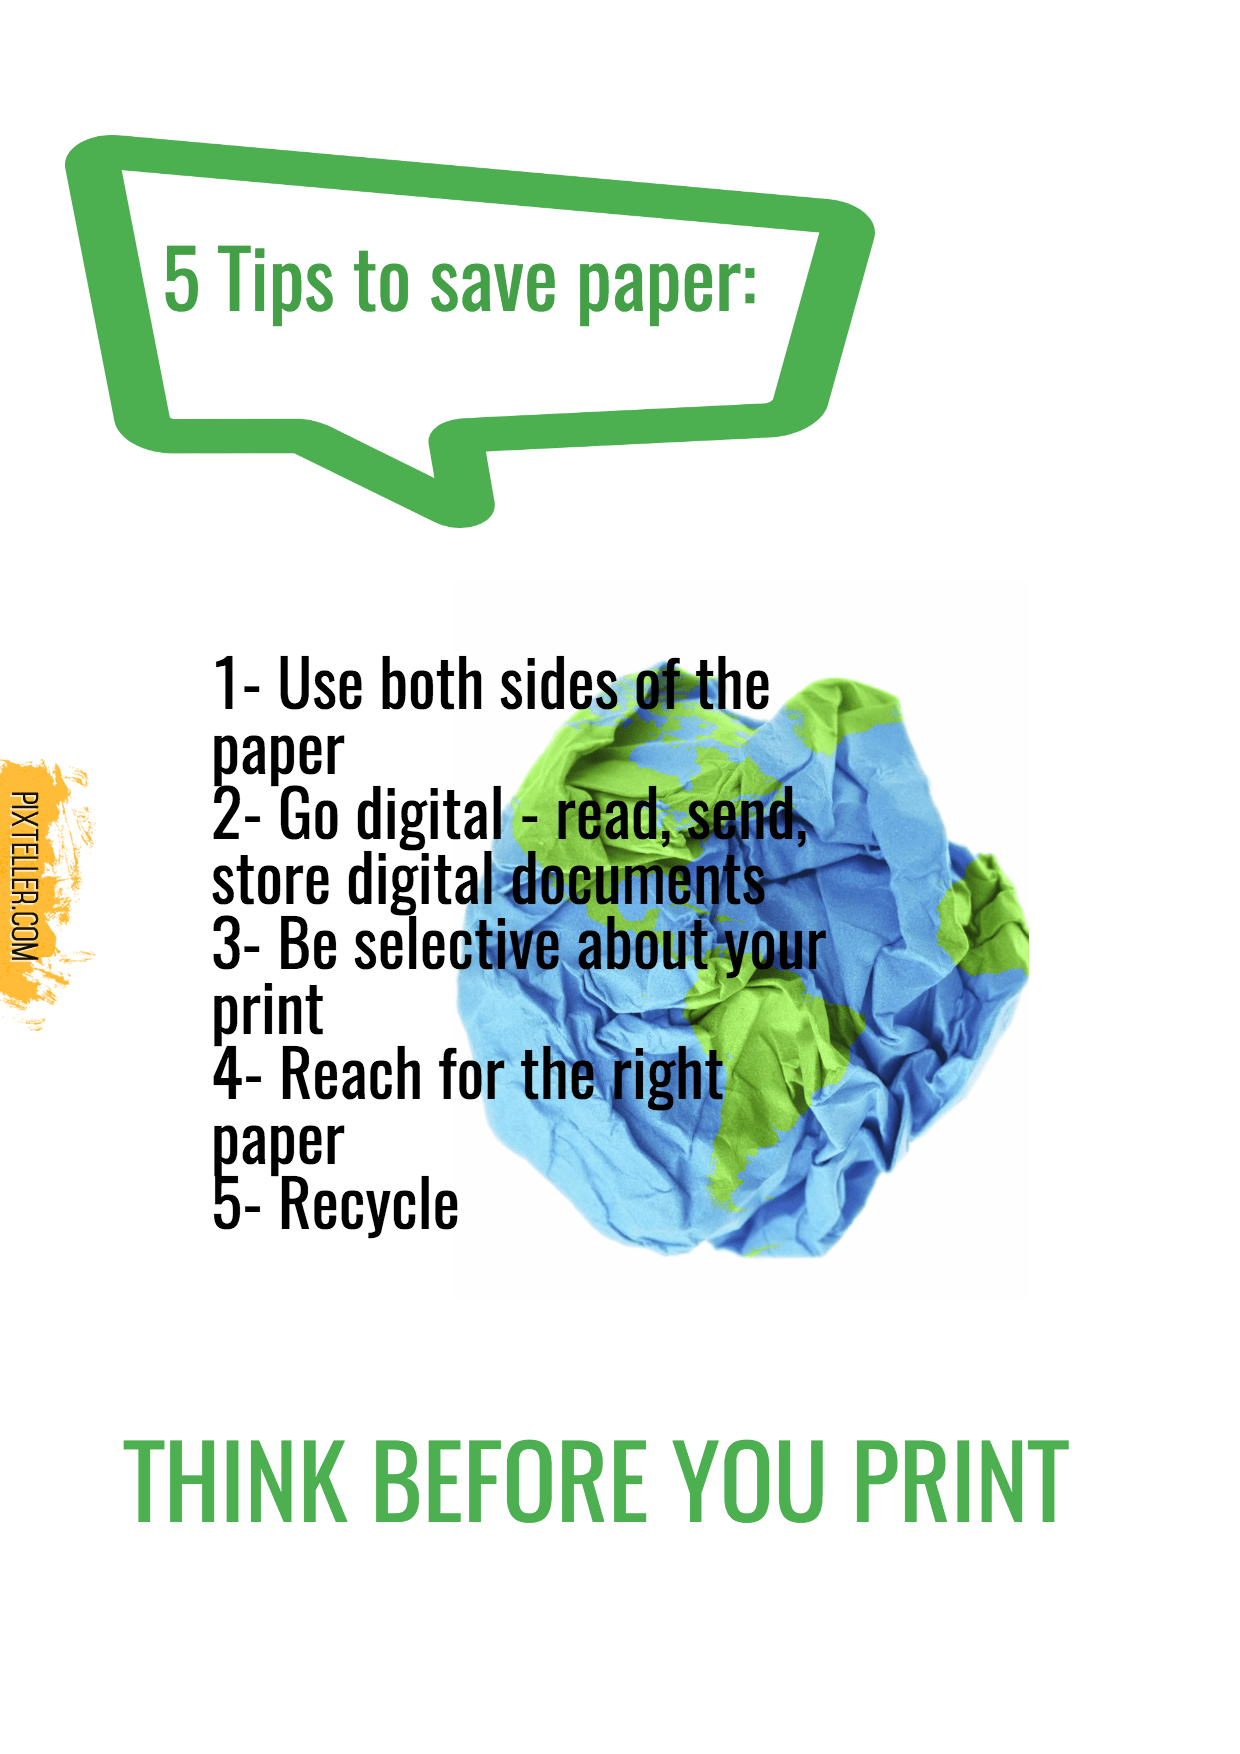 THINK BEFORE YOU PRINT Design 